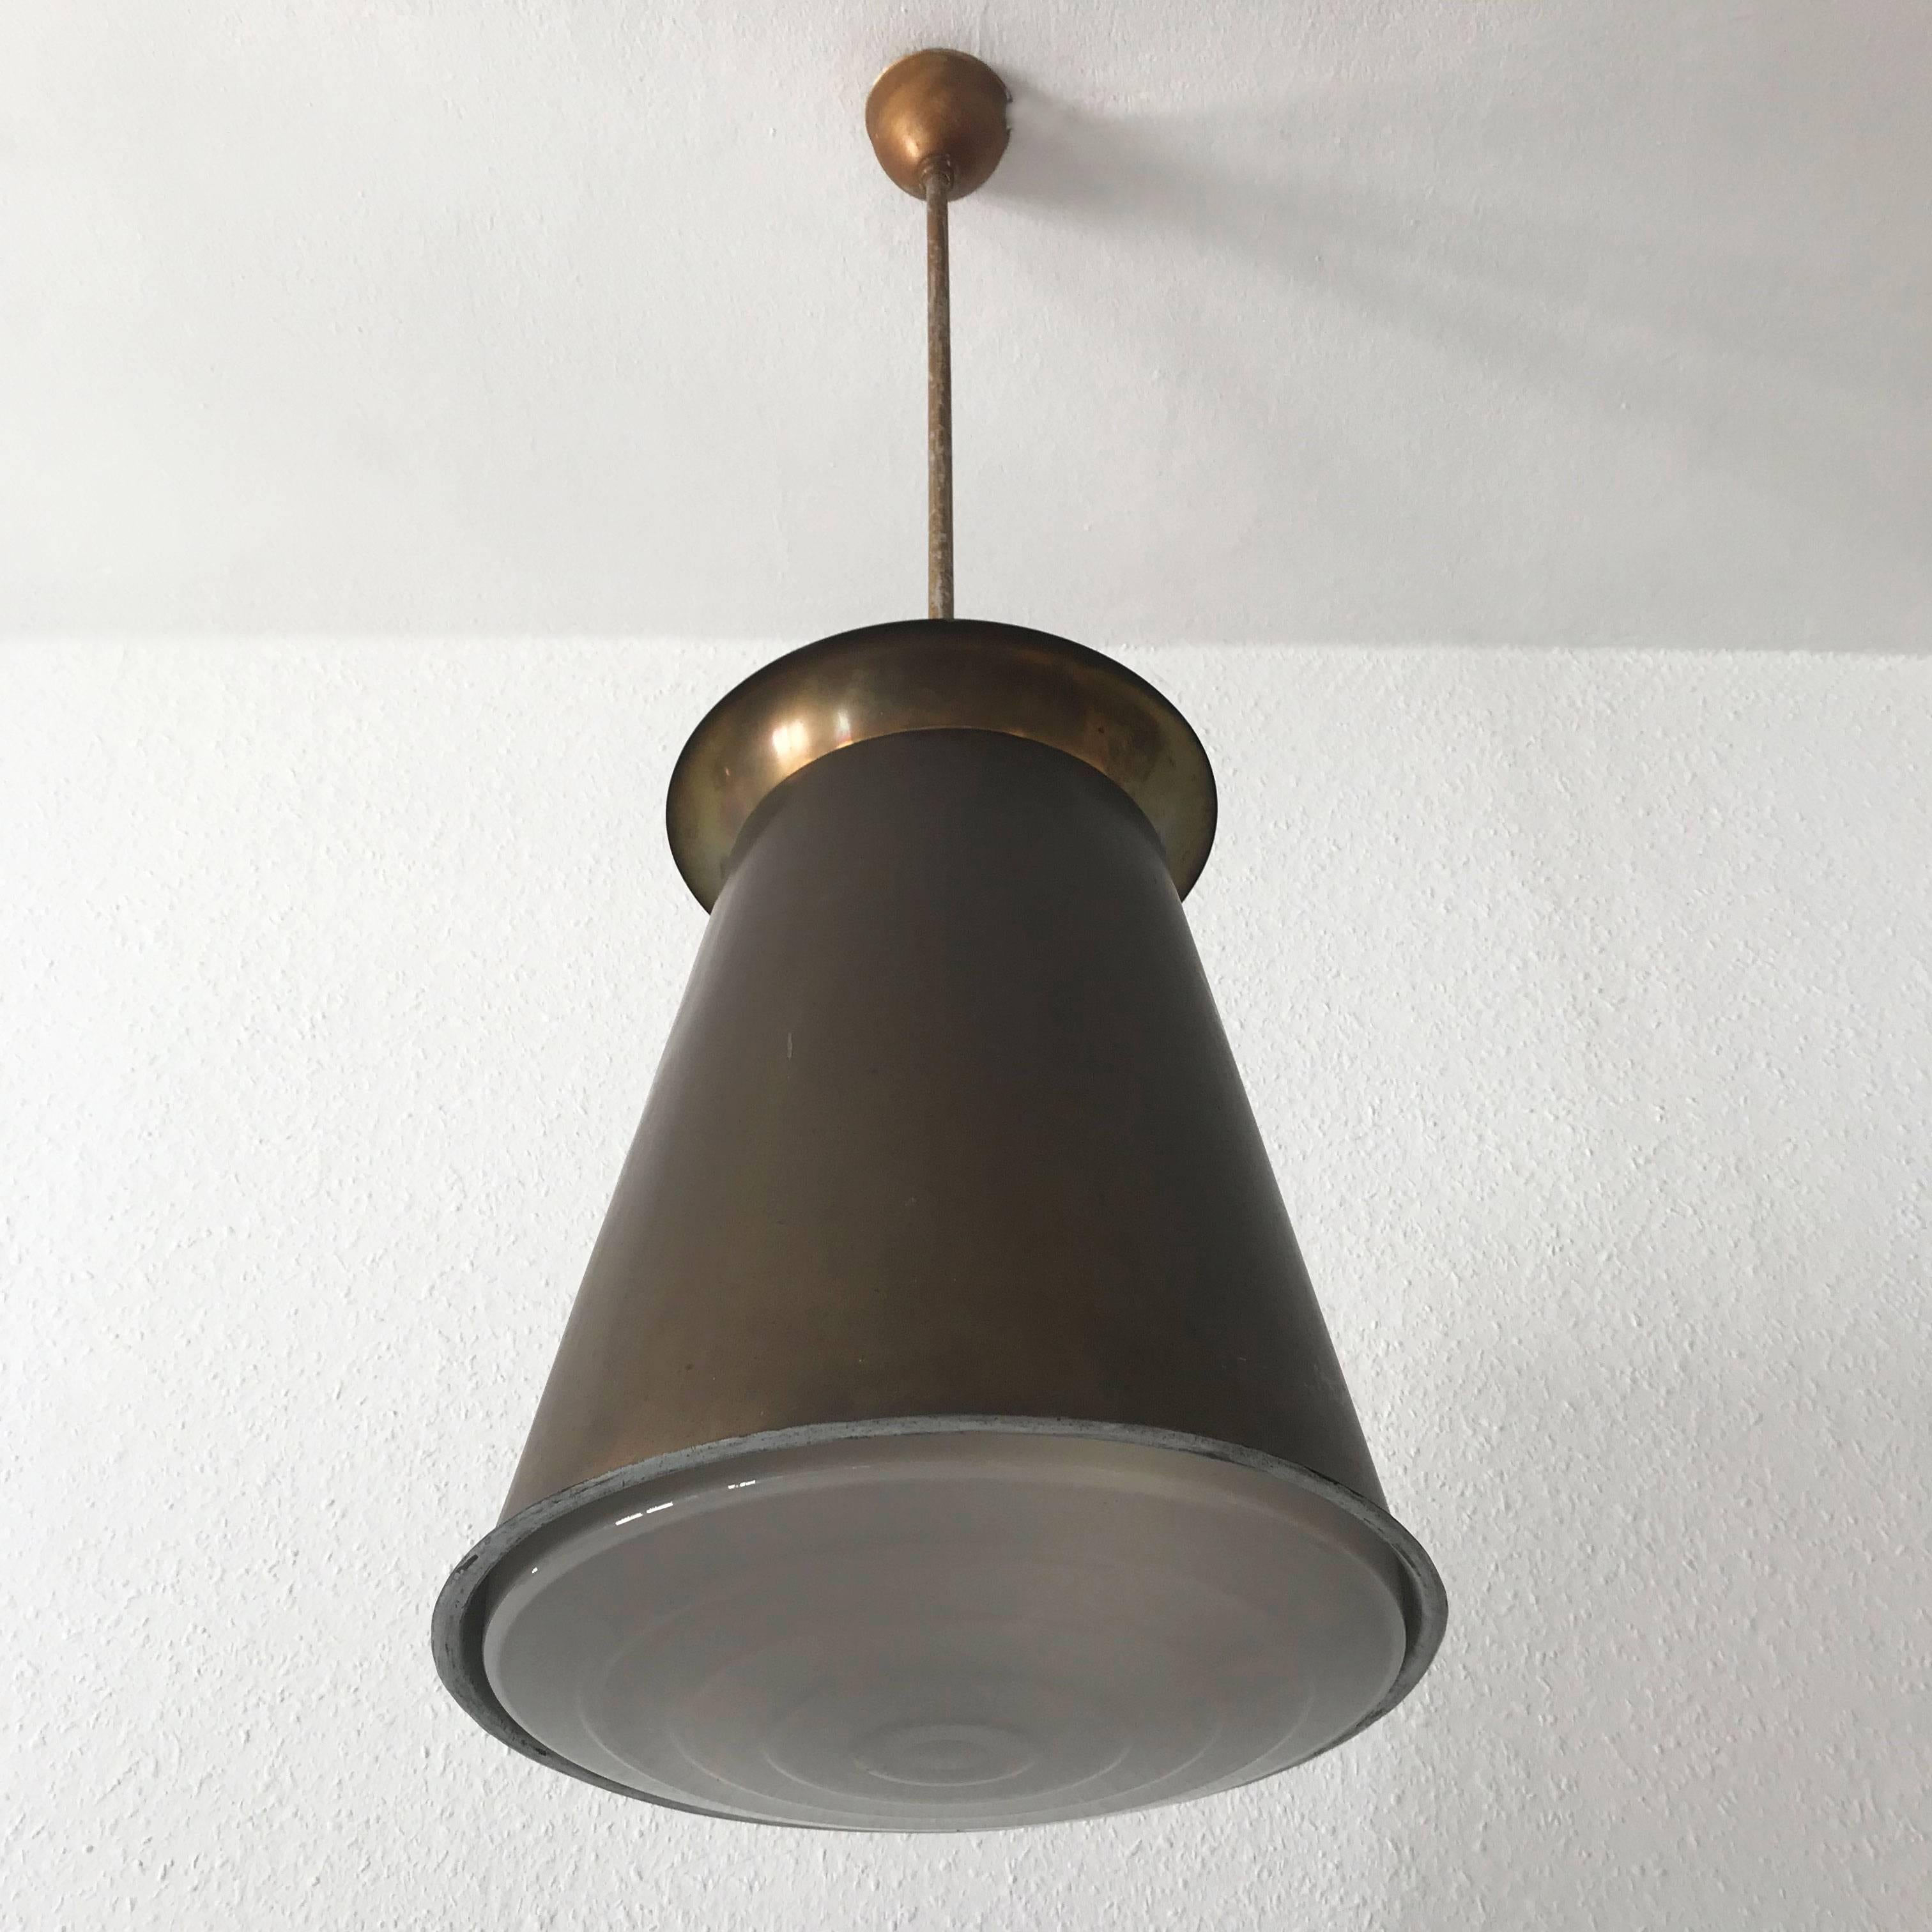 Exceptional Bauhaus Pendant Lamp by Adolf Meyer for Zeiss Ikon, 1930s, Germany For Sale 3